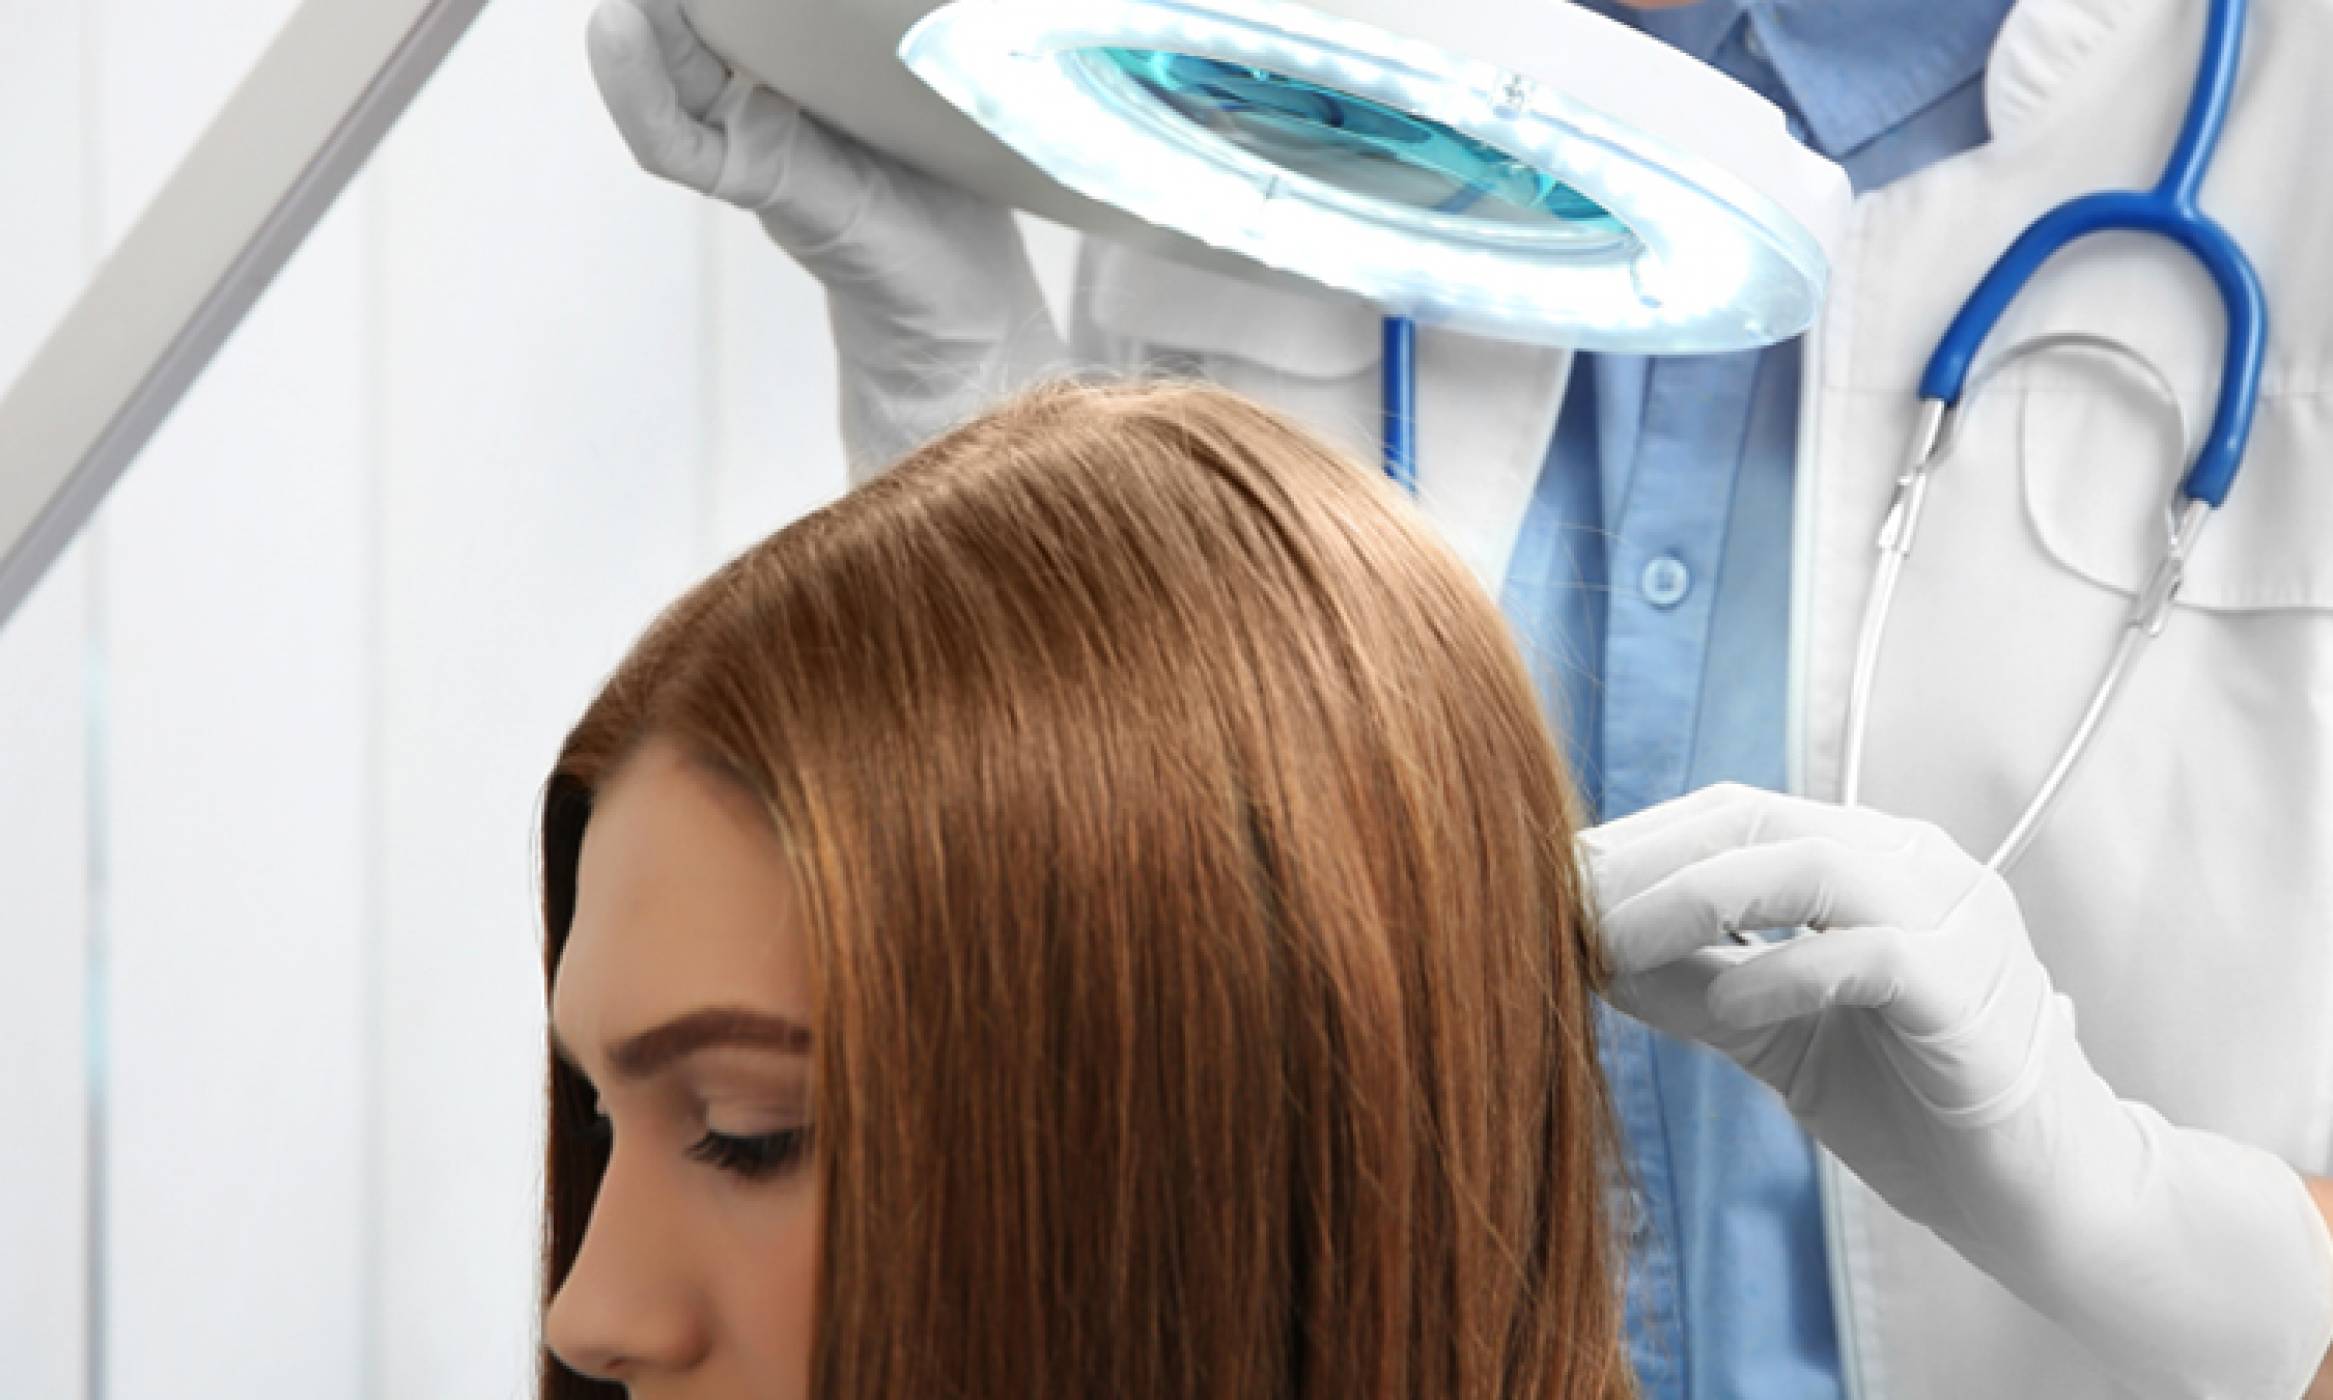 A female doctor is examining the scalp of a woman using a magnifier to treat hair thinning with a hair regrowth treatment.